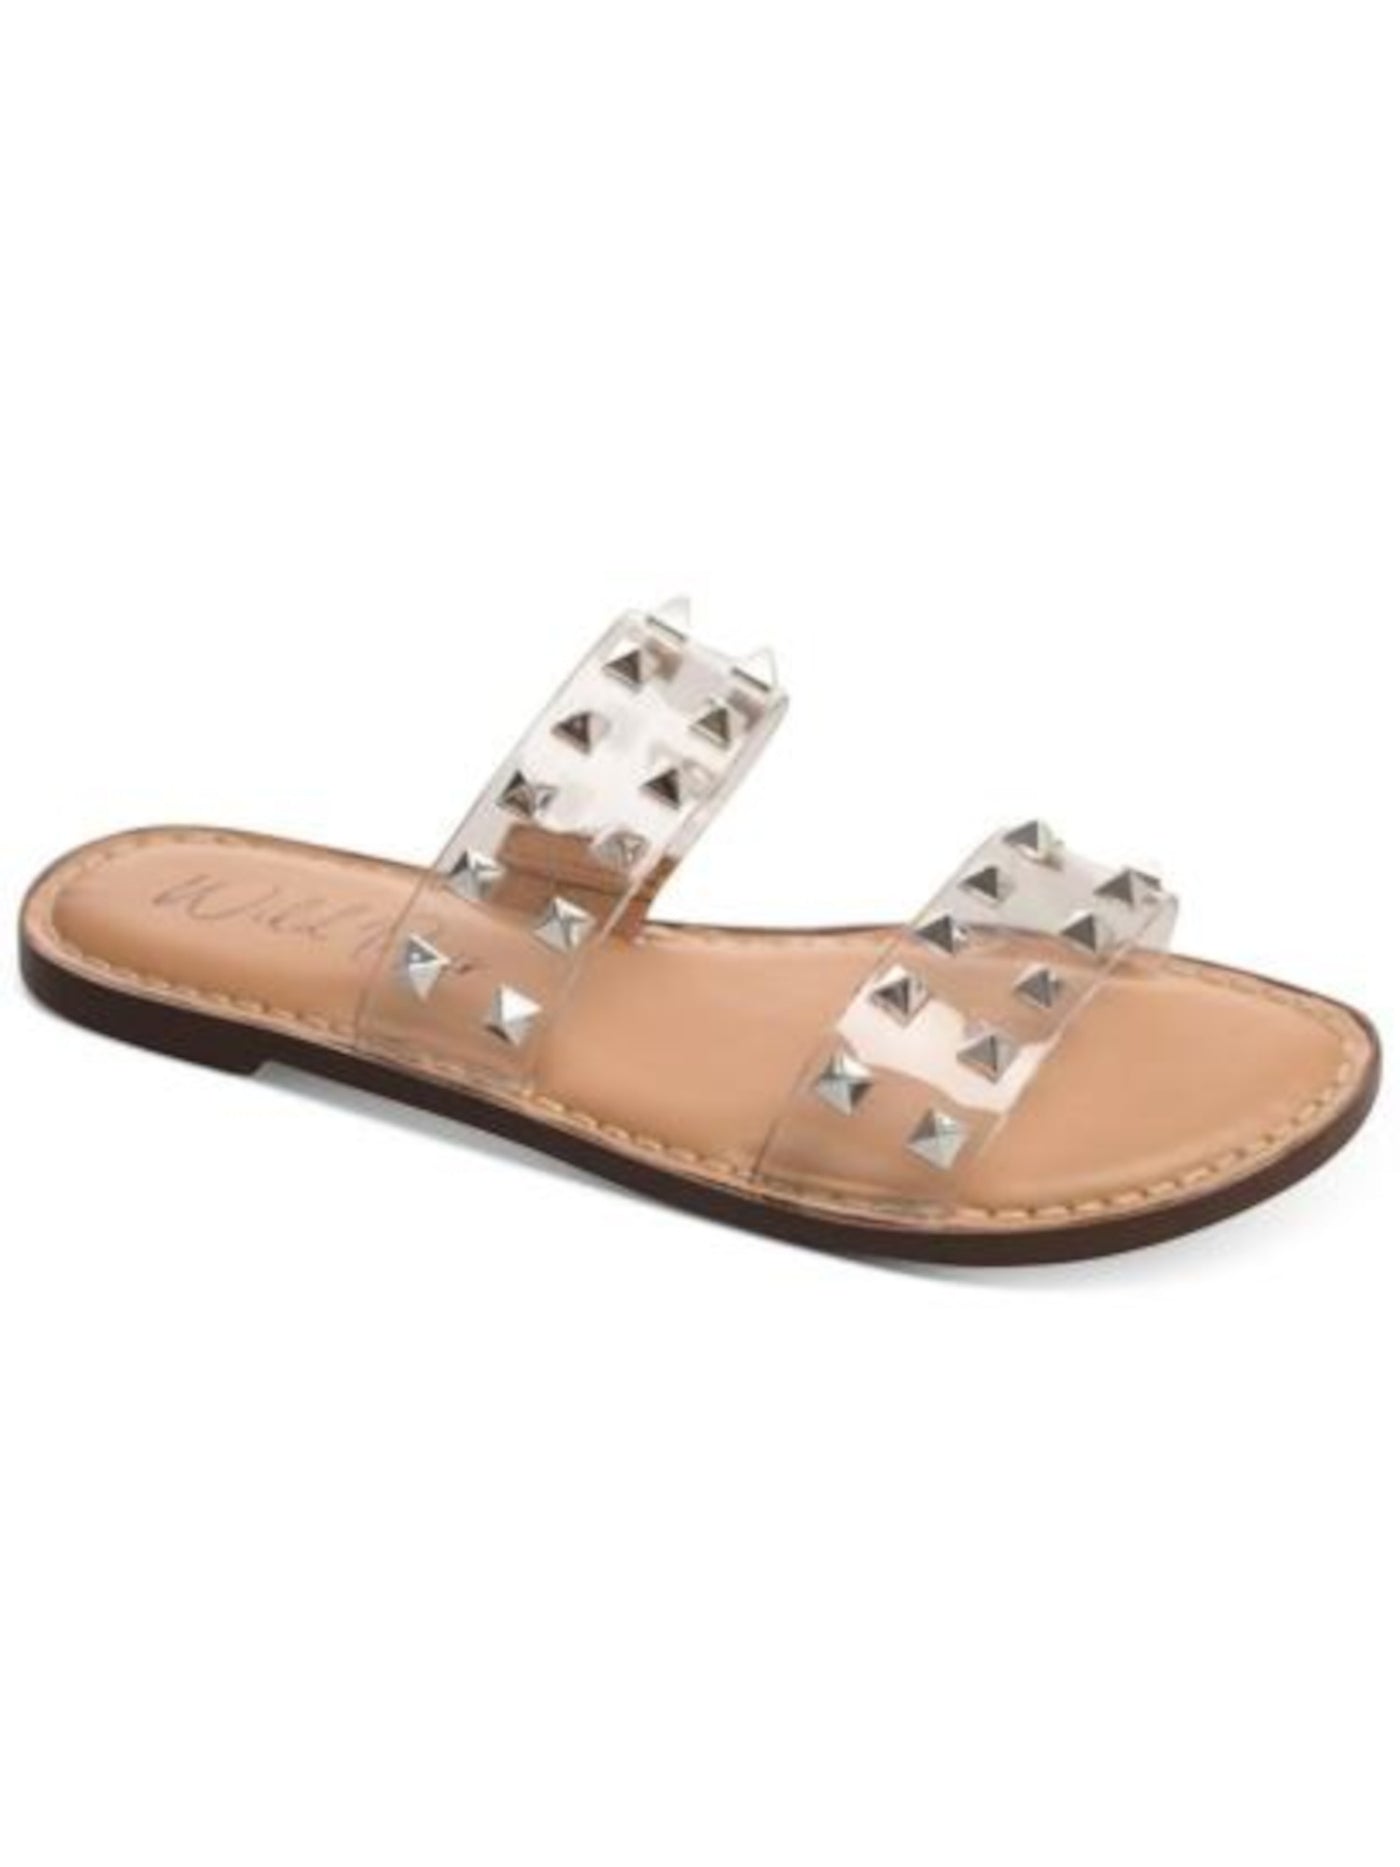 WILD PAIR Womens Beige Double Band Studded Ginniev Round Toe Slip On Slide Sandals Shoes 10 M